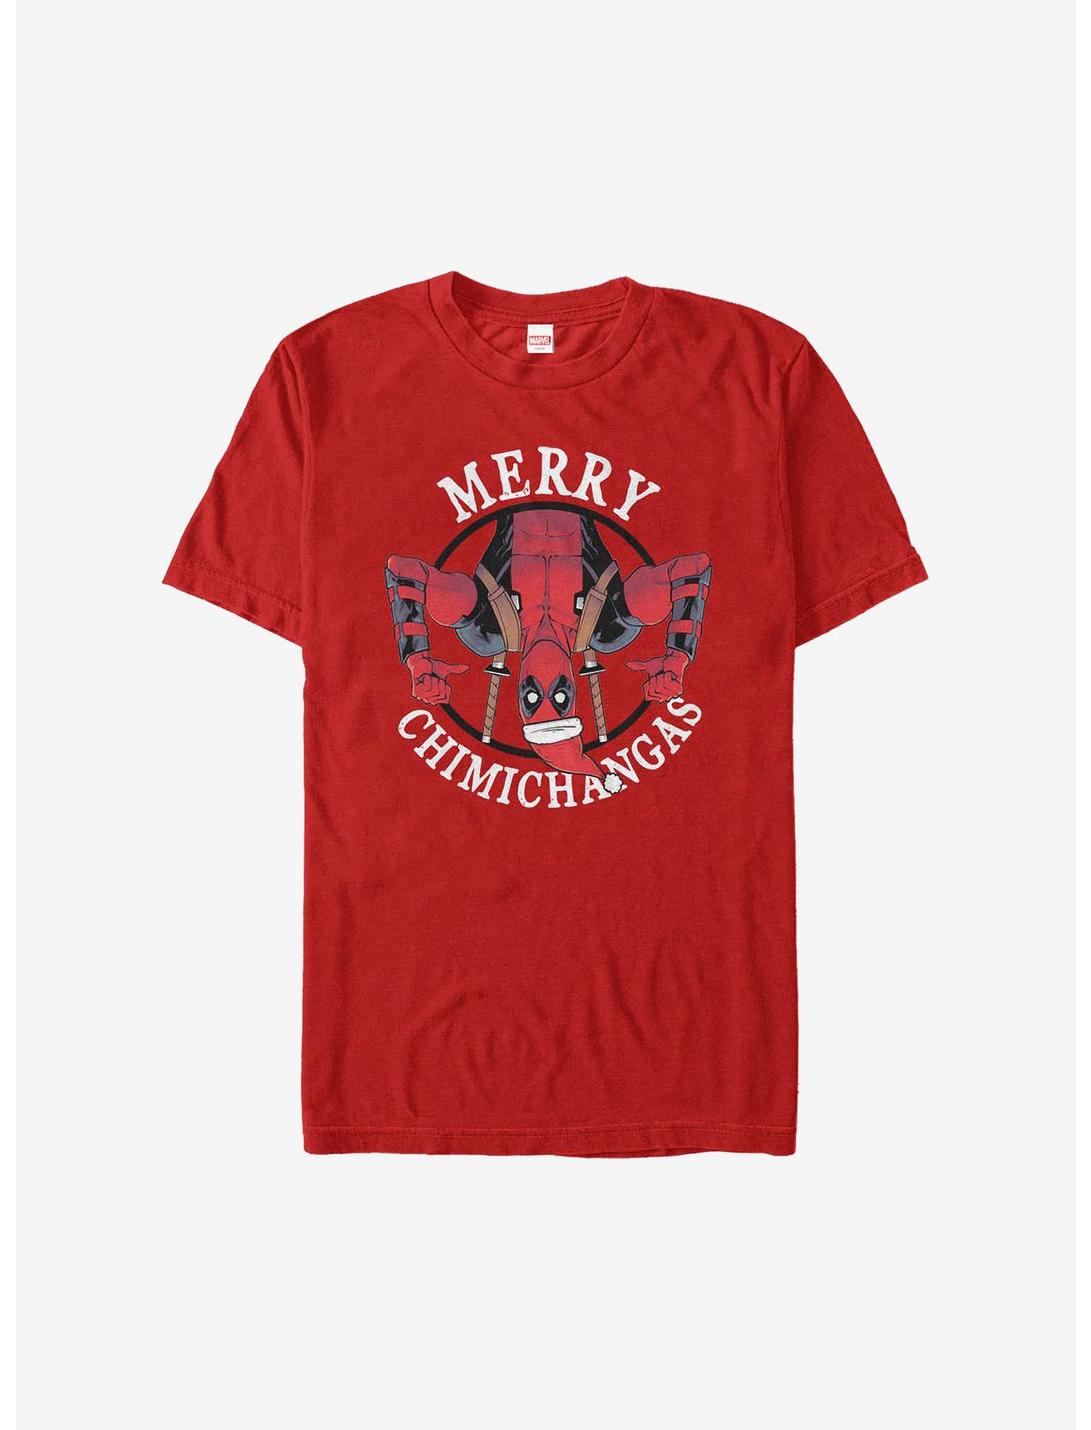 Marvel Deadpool Merry Chimichangas Holiday T-Shirt, RED, hi-res